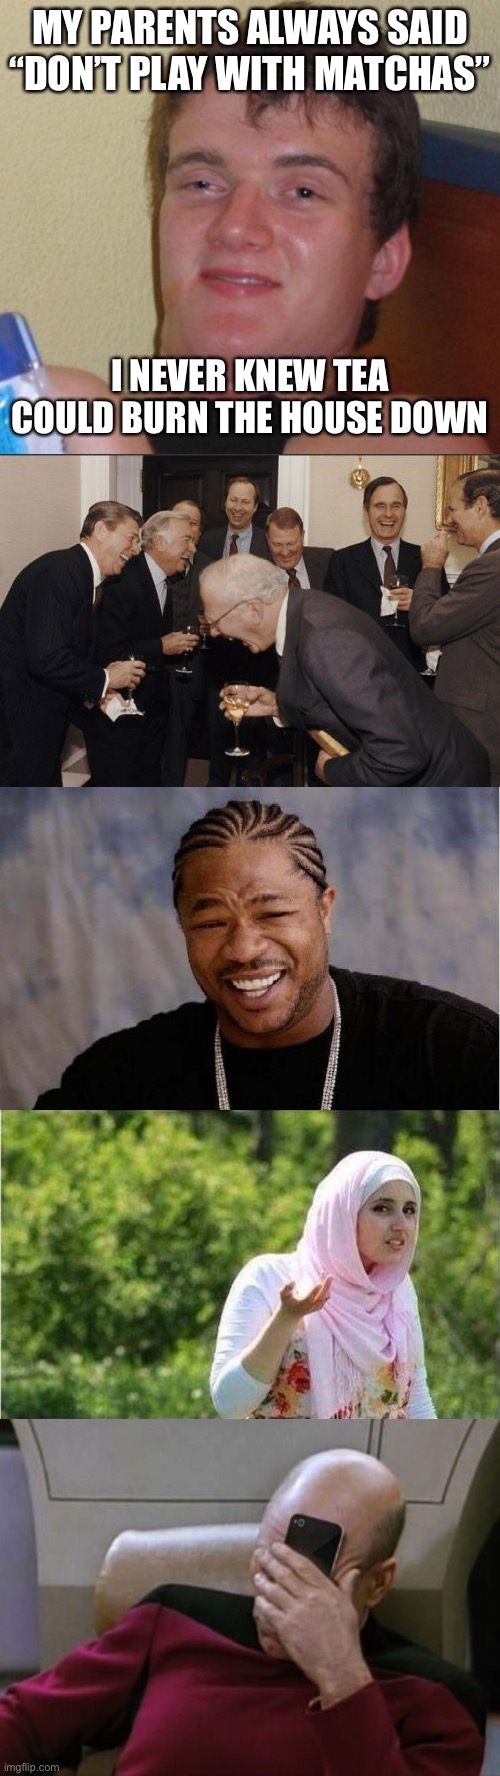 MY PARENTS ALWAYS SAID “DON’T PLAY WITH MATCHAS”; I NEVER KNEW TEA COULD BURN THE HOUSE DOWN | image tagged in stoned guy,memes,laughing men in suits,yo dawg heard you,confused muslima,picard facepalm phone | made w/ Imgflip meme maker